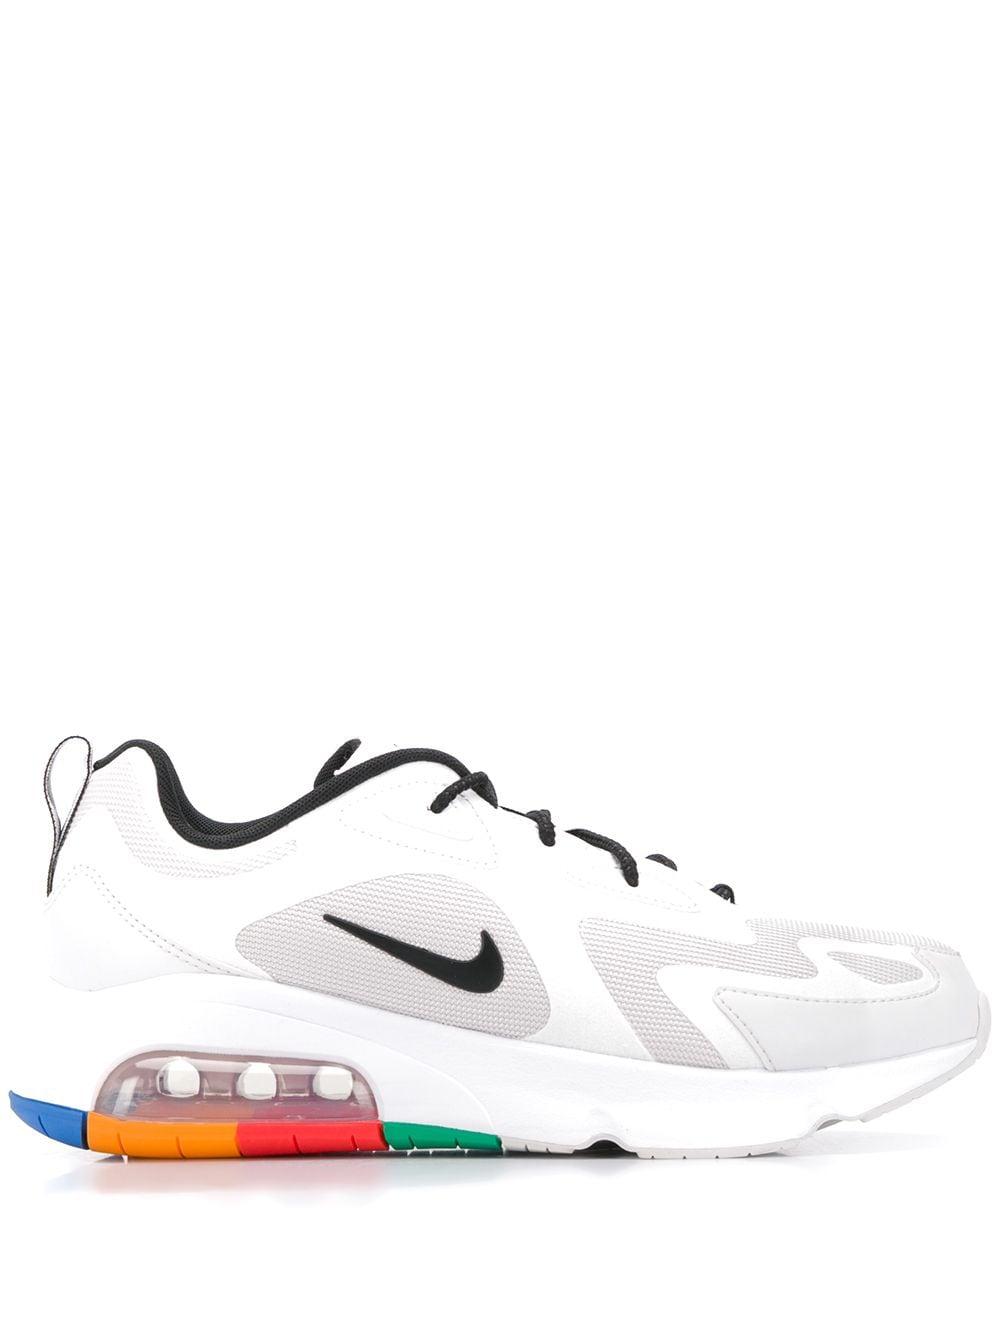 Nike Lace Air Max 200 (1996 World Stage) Sneakers in White for Men - Lyst